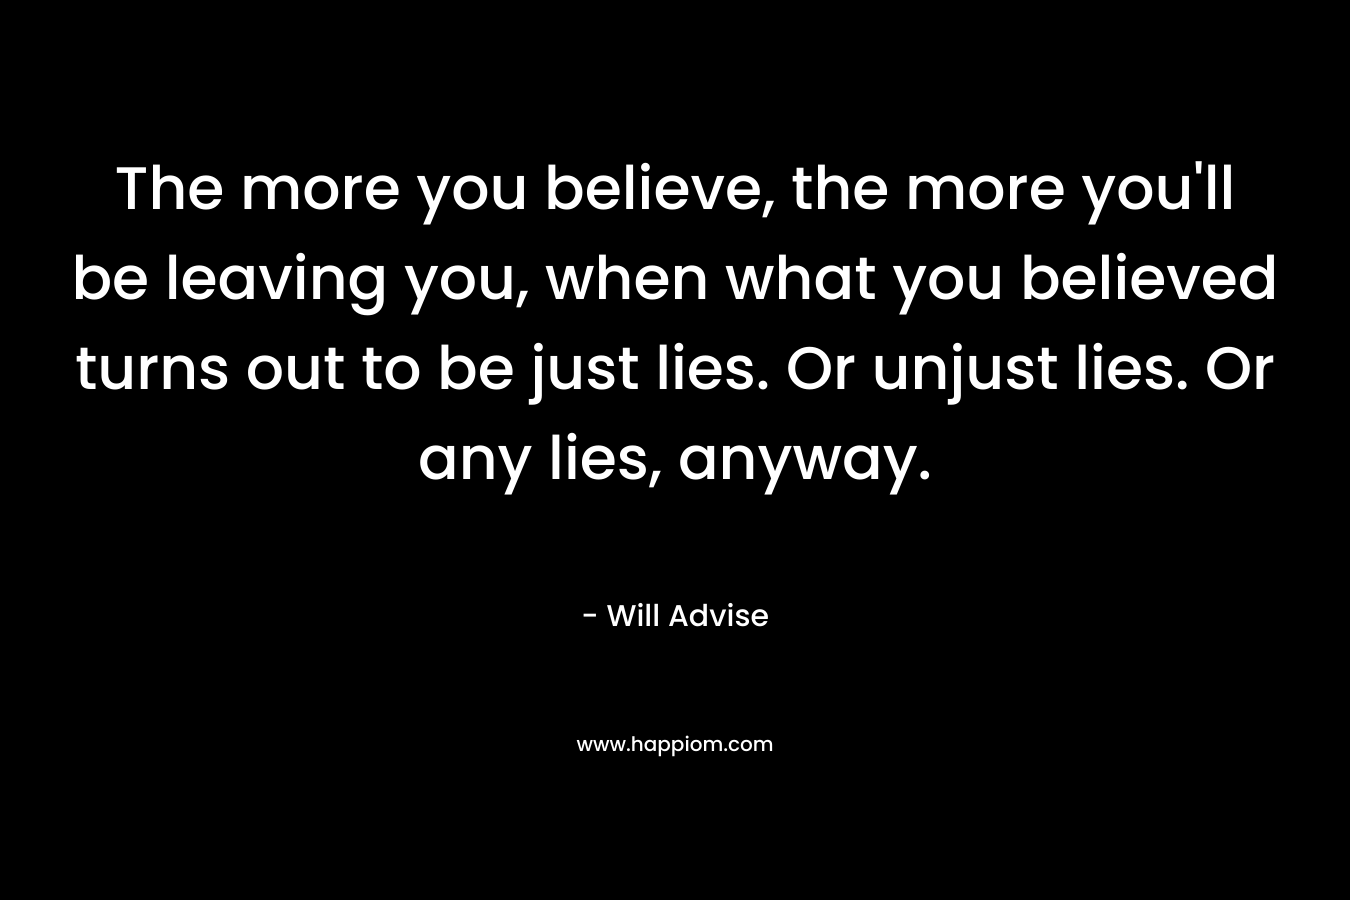 The more you believe, the more you'll be leaving you, when what you believed turns out to be just lies. Or unjust lies. Or any lies, anyway.